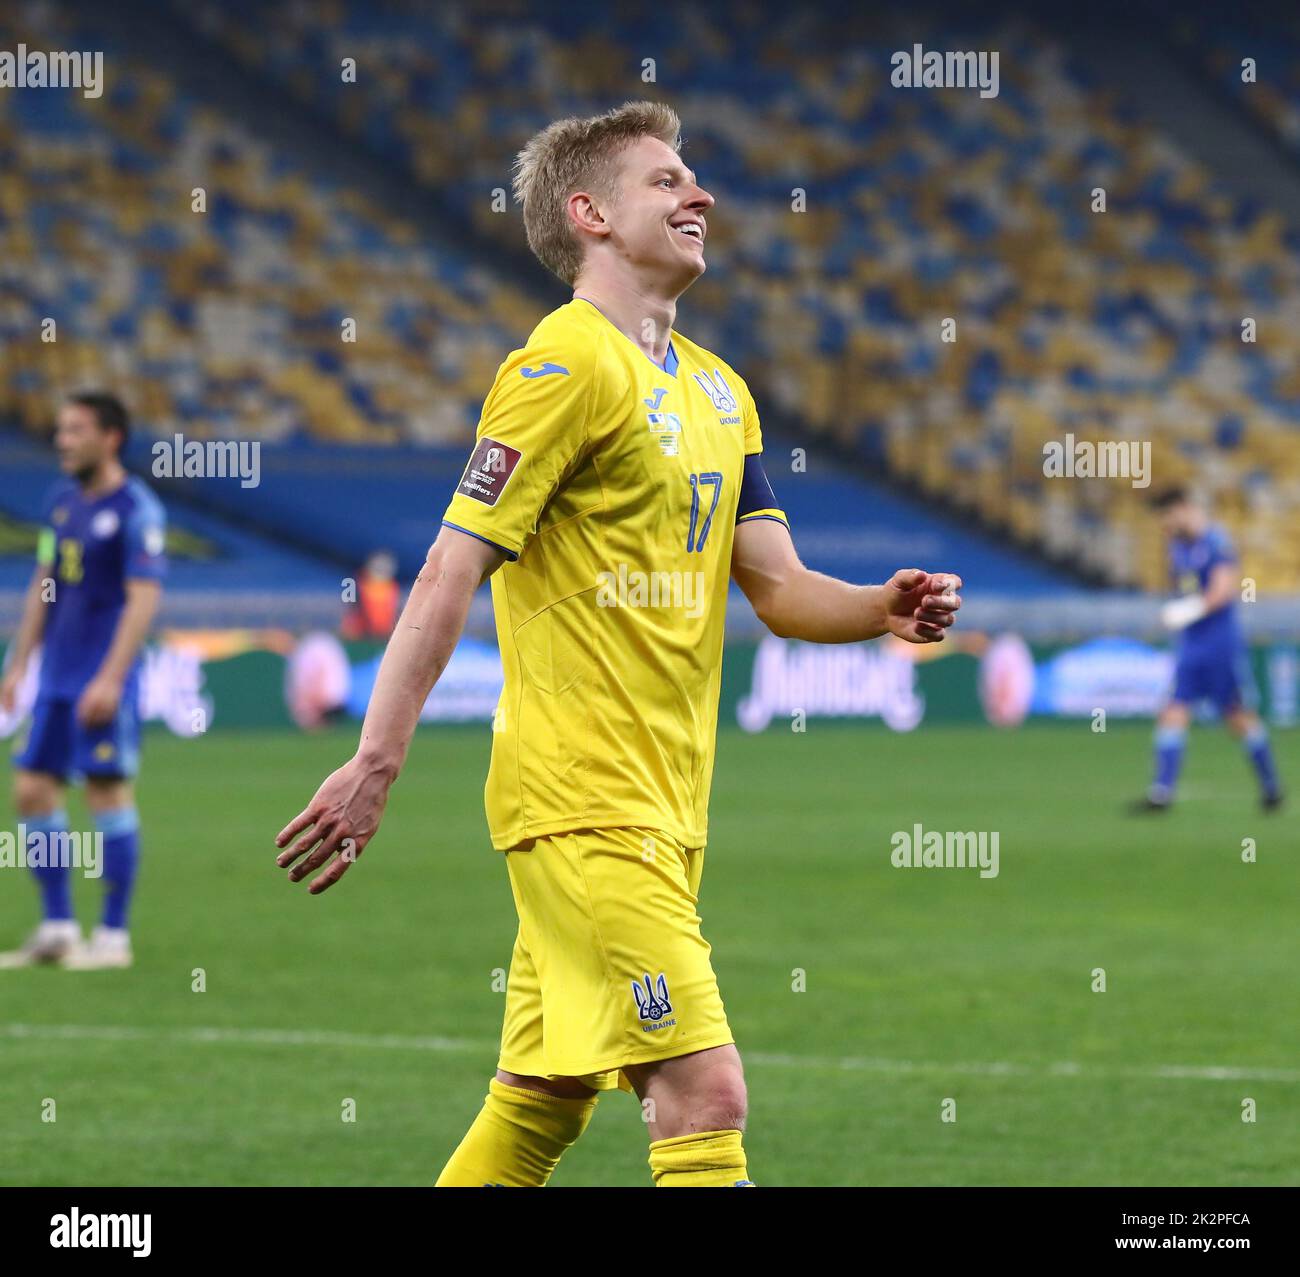 KYIV, UKRAINE - MARCH 31, 2021: Oleksandr Zinchenko of Ukraine reacts after missed a goal during the FIFA World Cup 2022 Qualifying round game against Kazakhstan at NSC Olimpiyskiy stadium in Kyiv Stock Photo